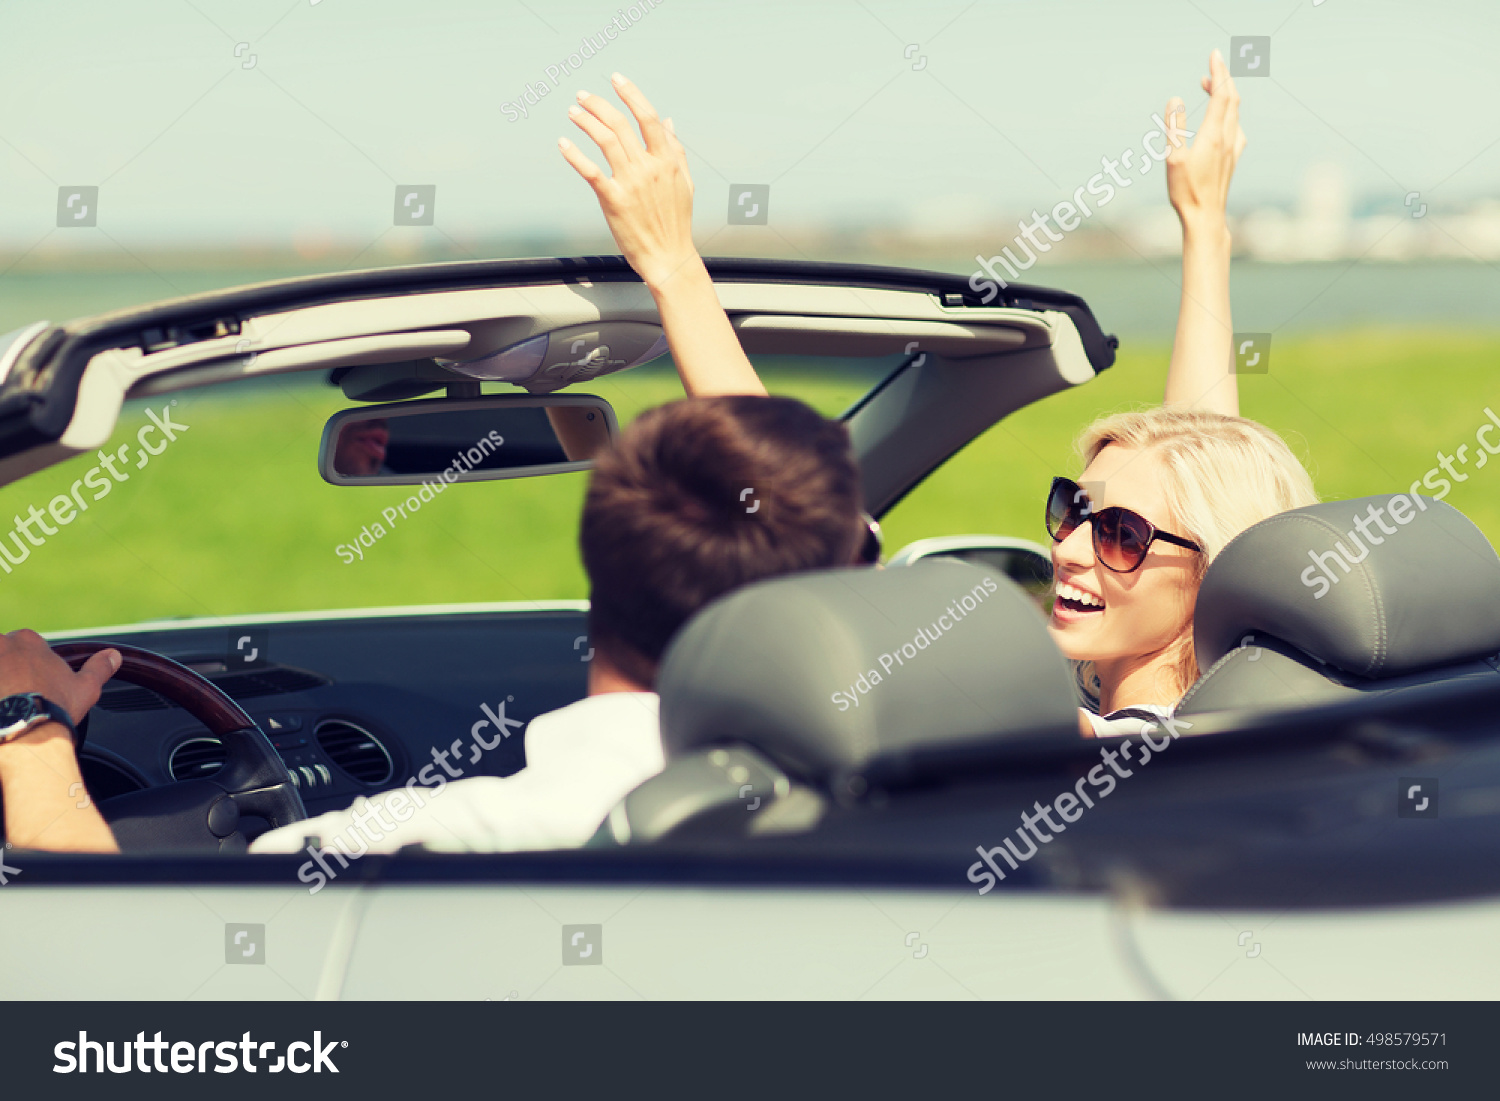 transport, road trip, leisure, couple and people concept - happy man and woman driving in cabriolet car outdoors #498579571